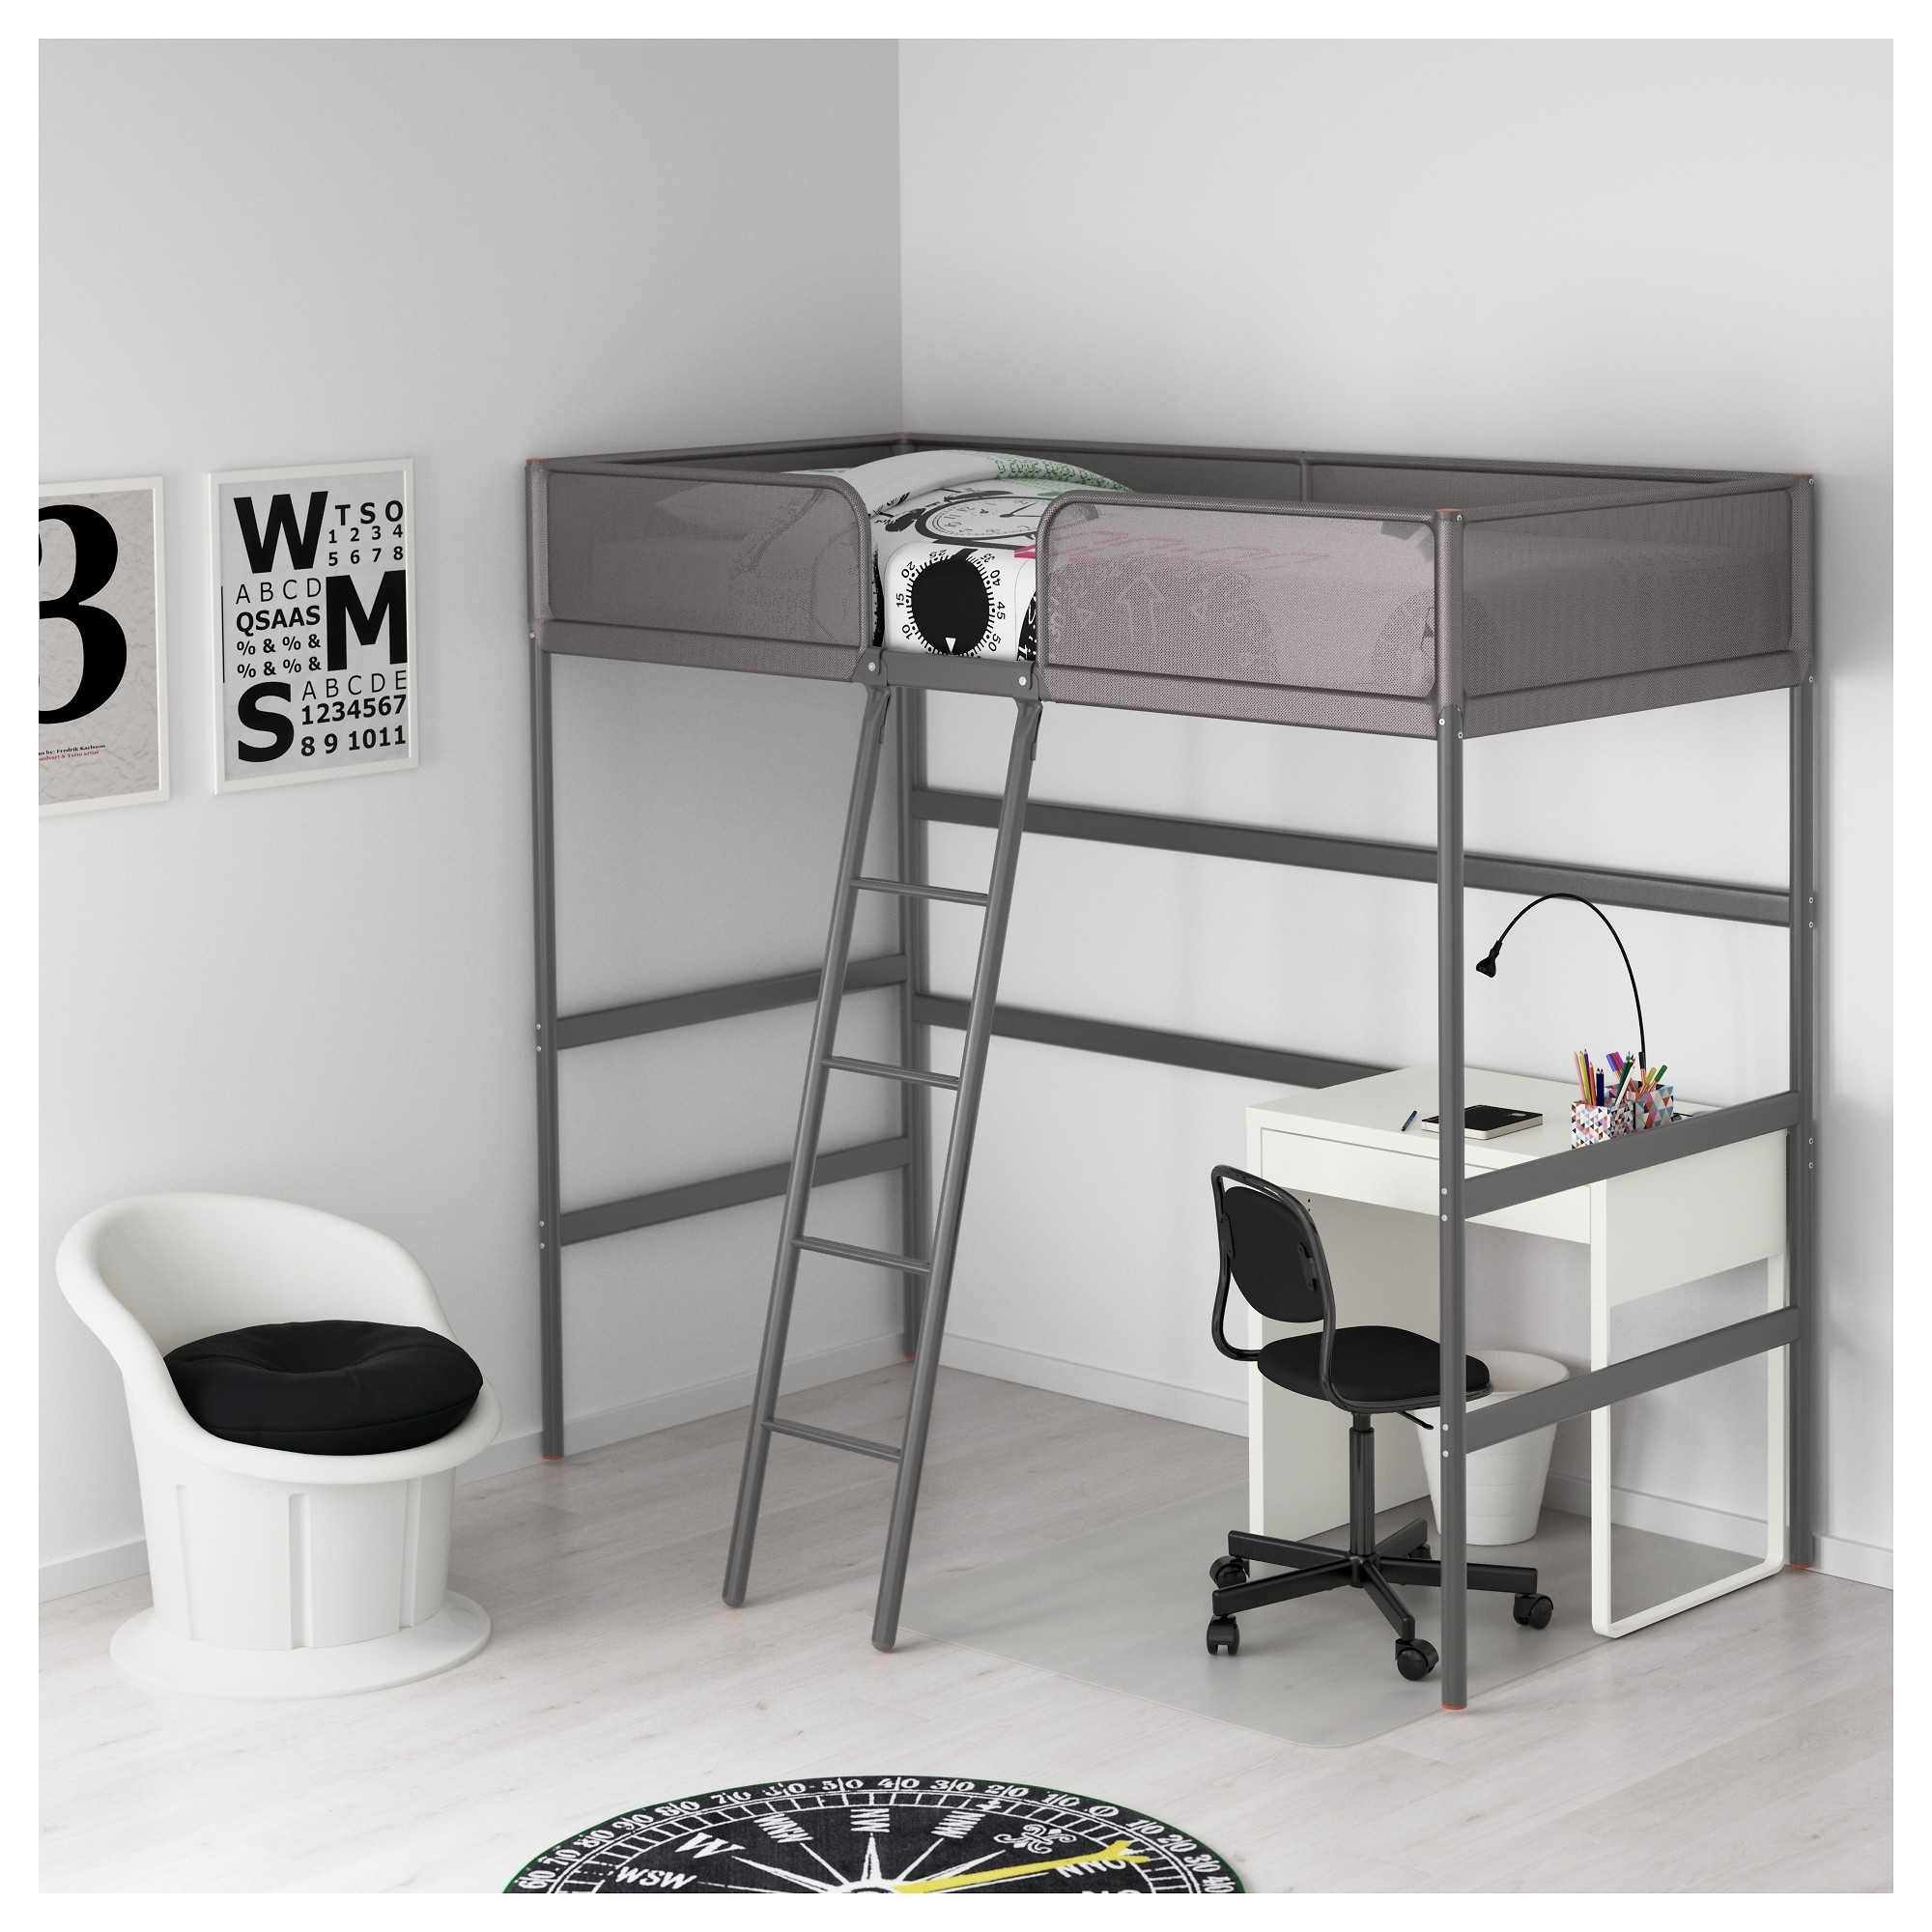 Ikea Loft Beds To Or Not In, Ikea Bunk Bed Reviews